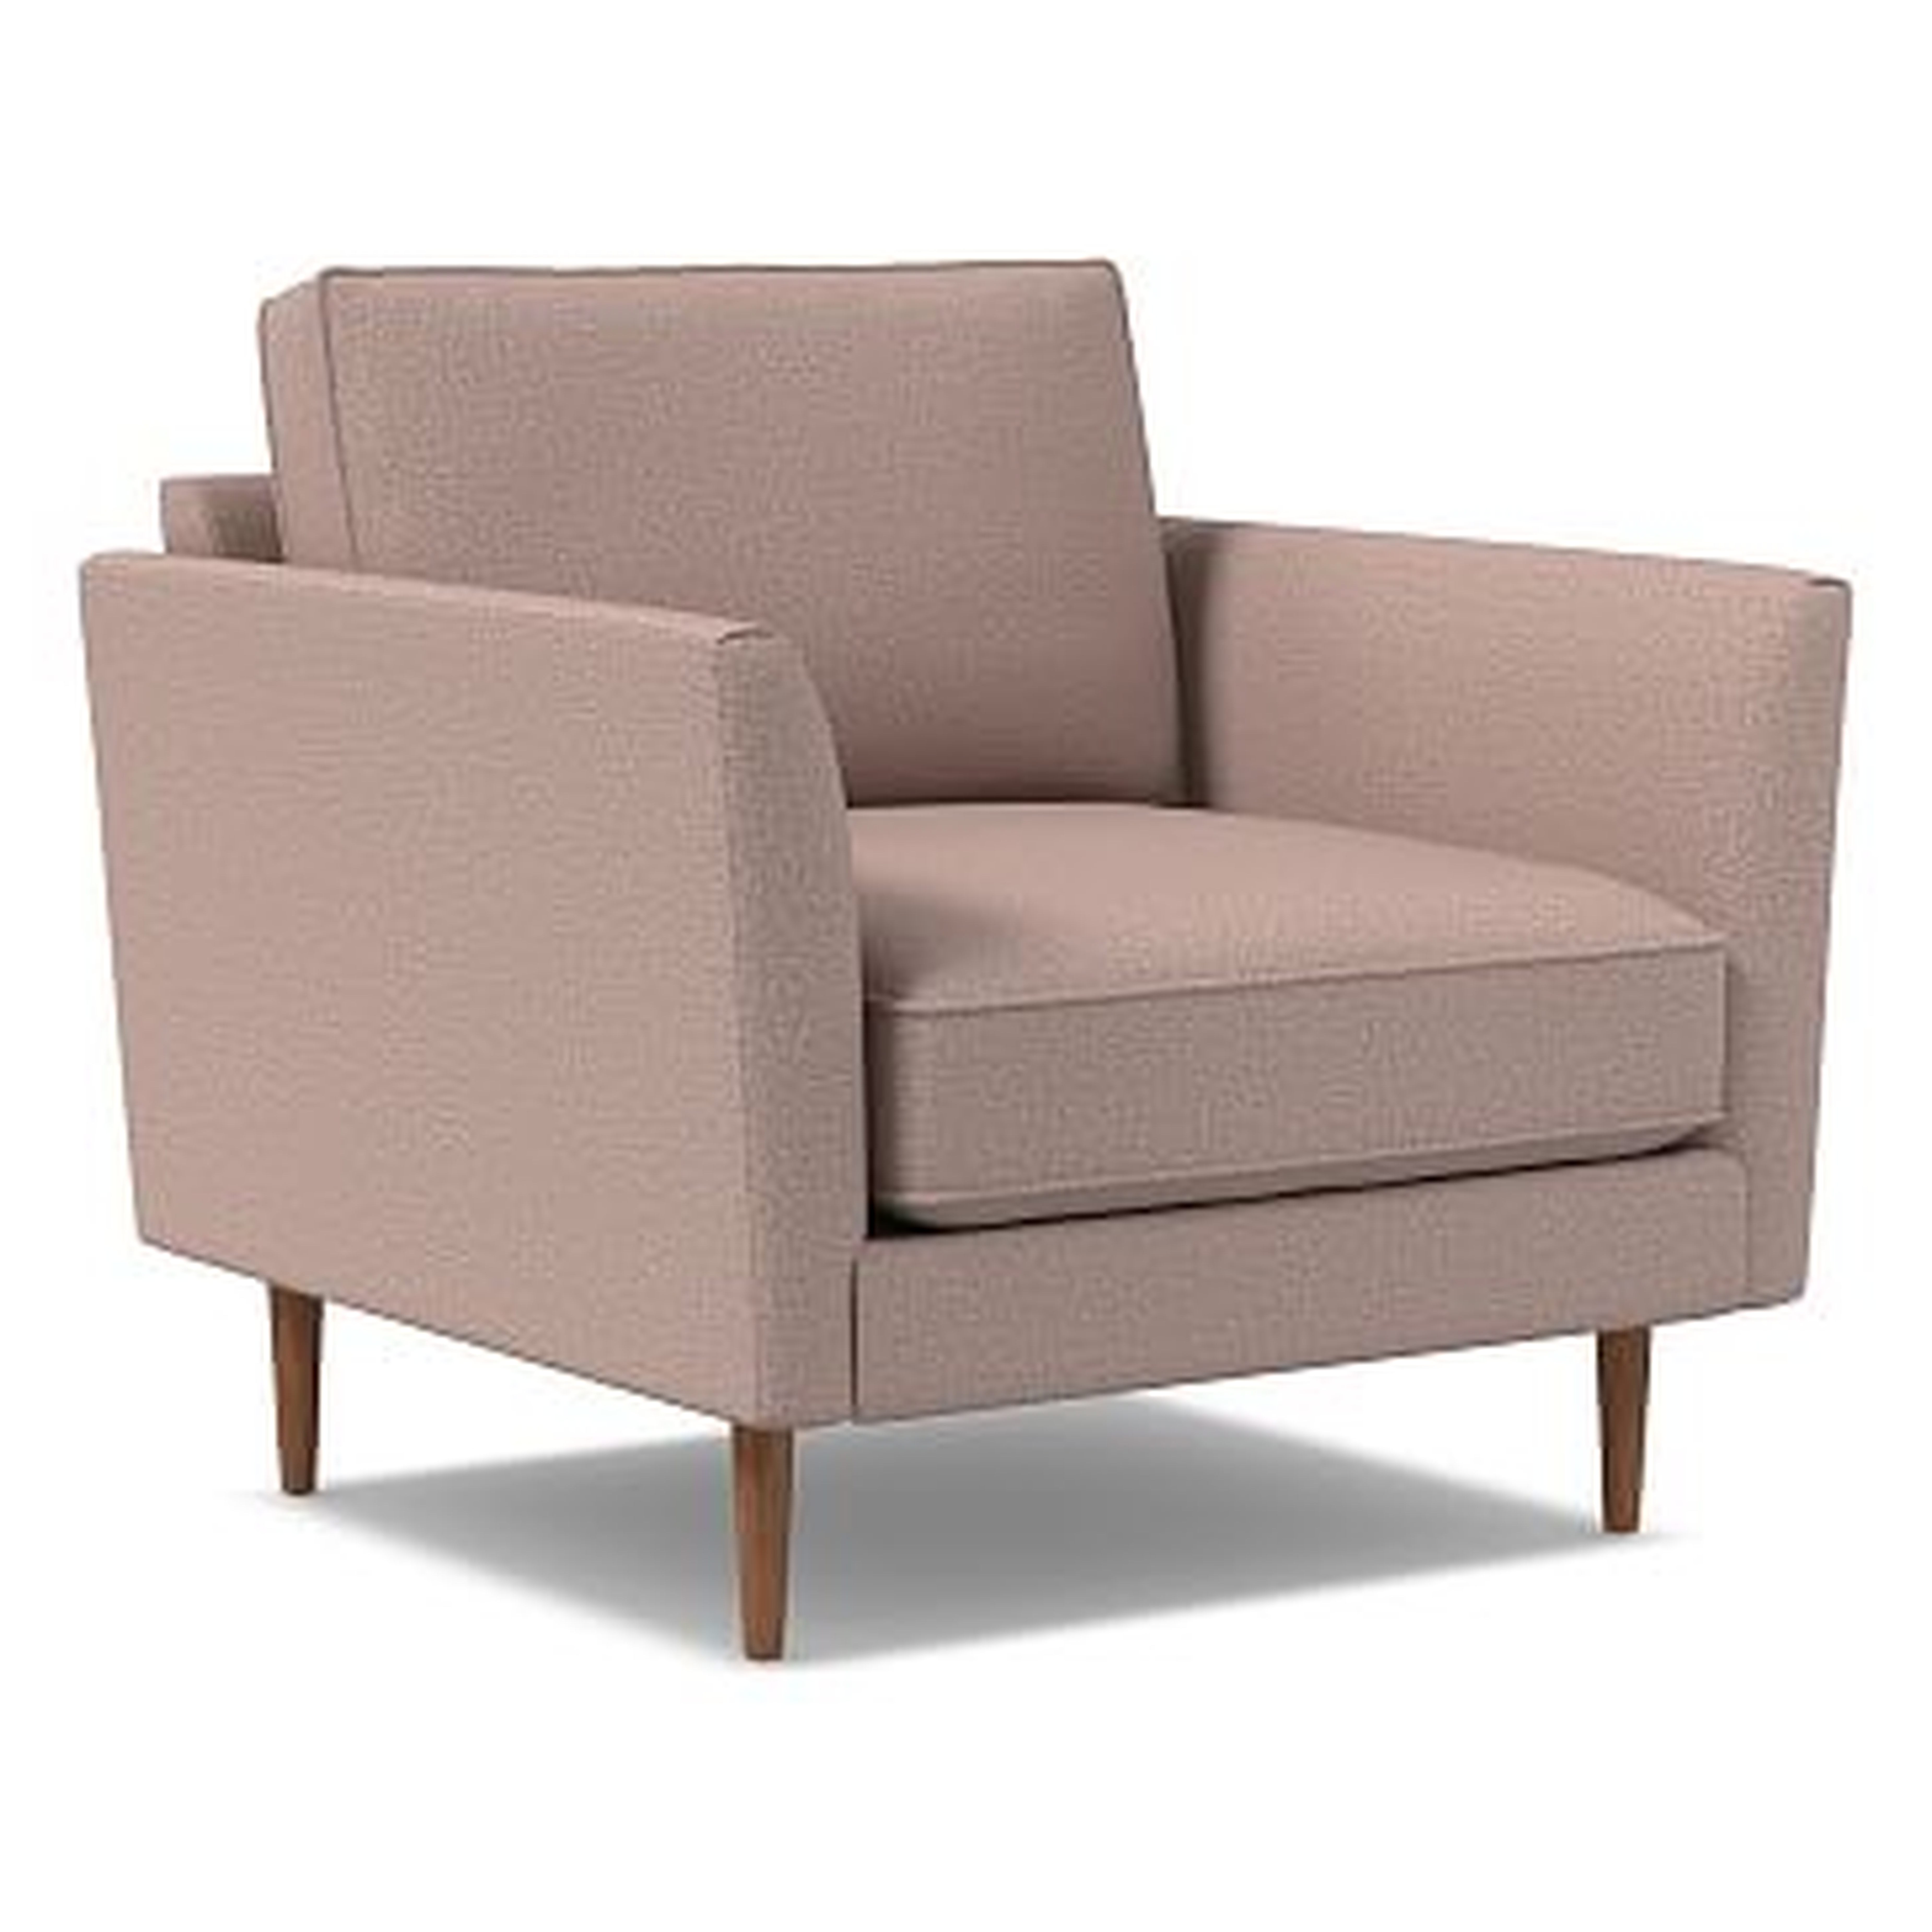 Alina Chair, Poly, Chenille Tweed, Mauve, Pecan - West Elm